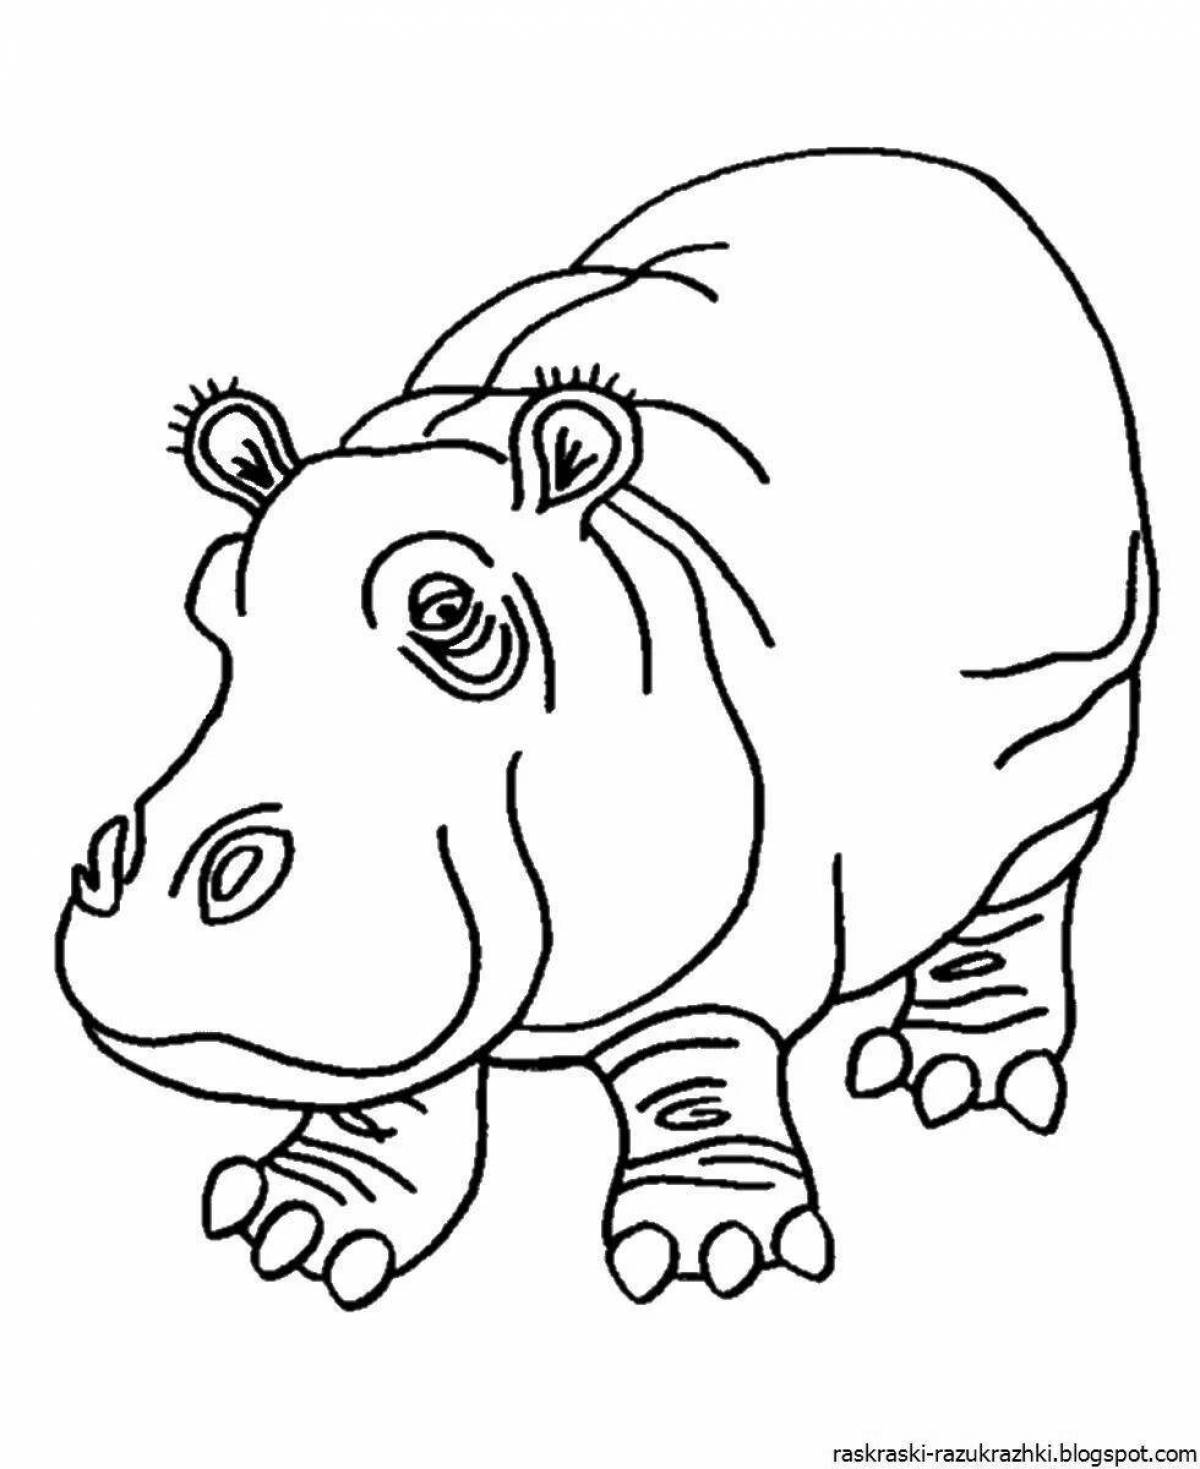 Dazzling hippo coloring for kids